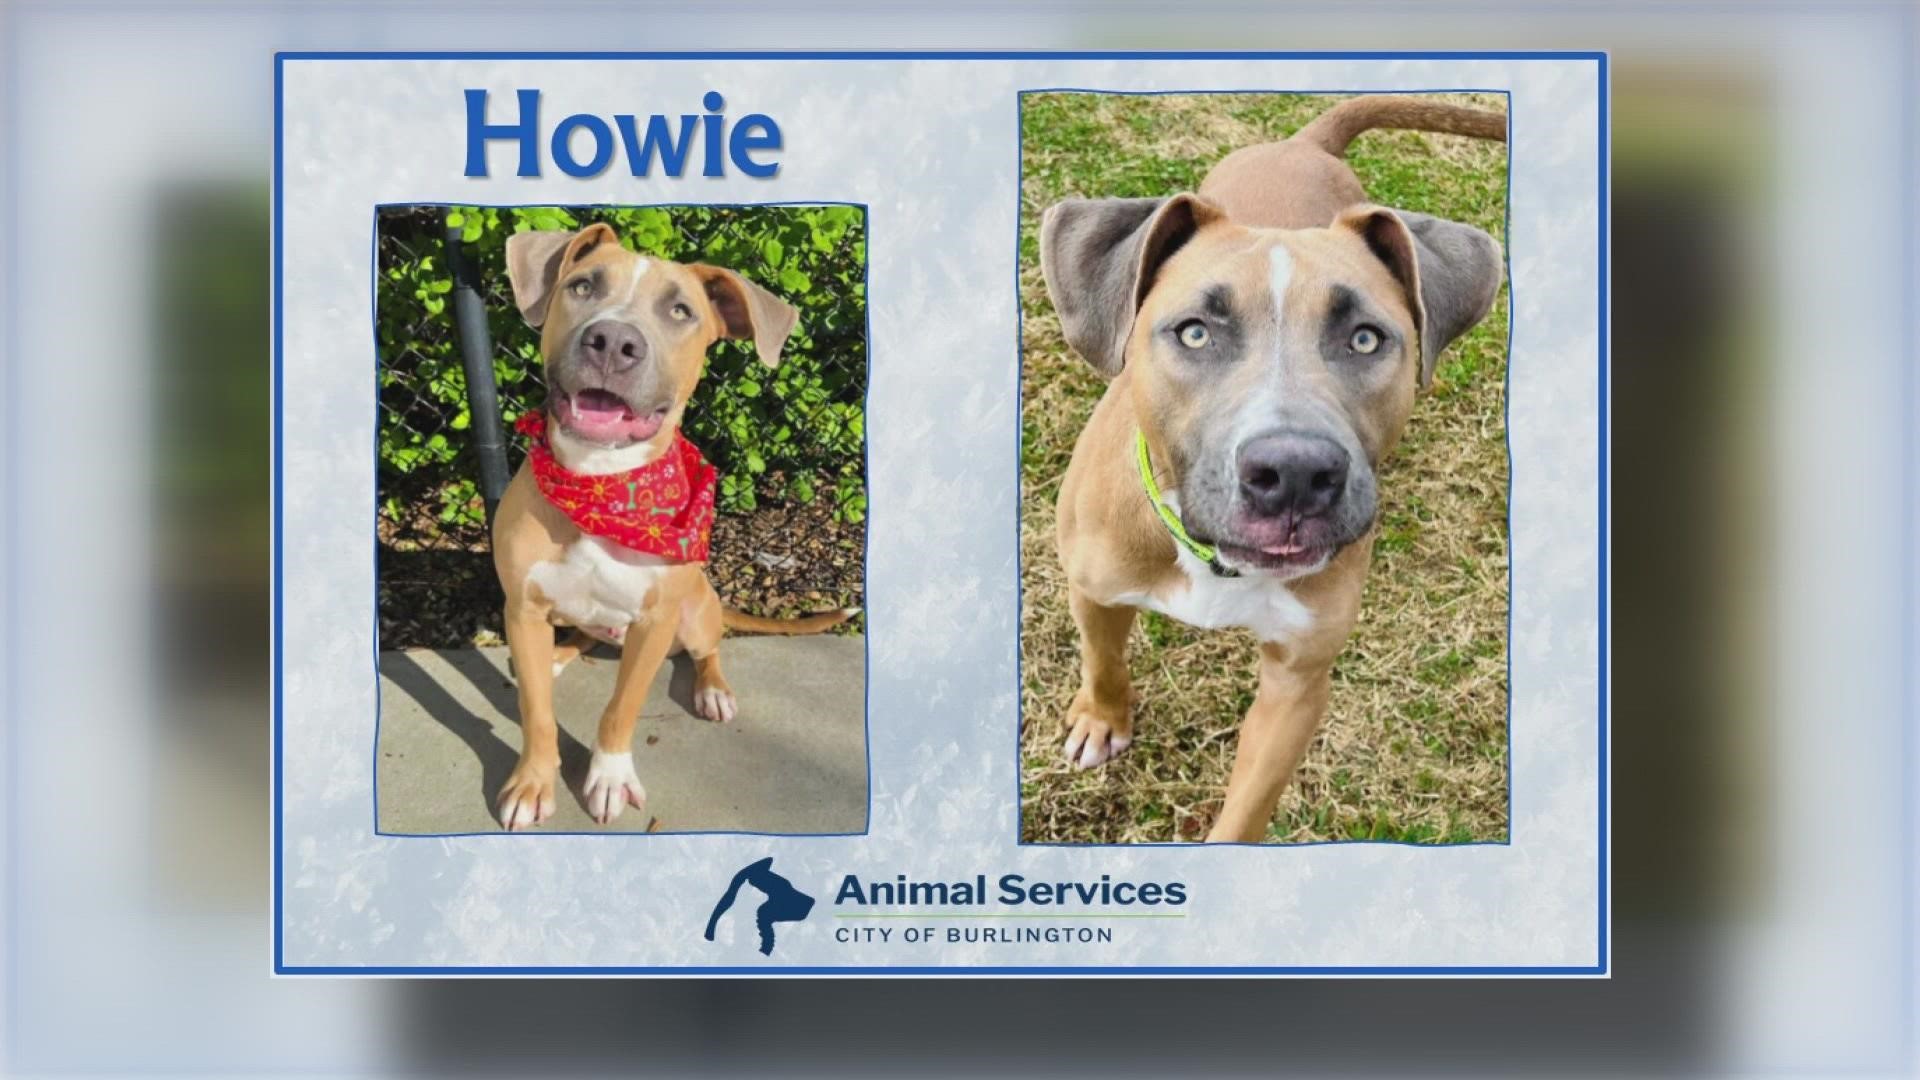 Let’s get Howie adopted!